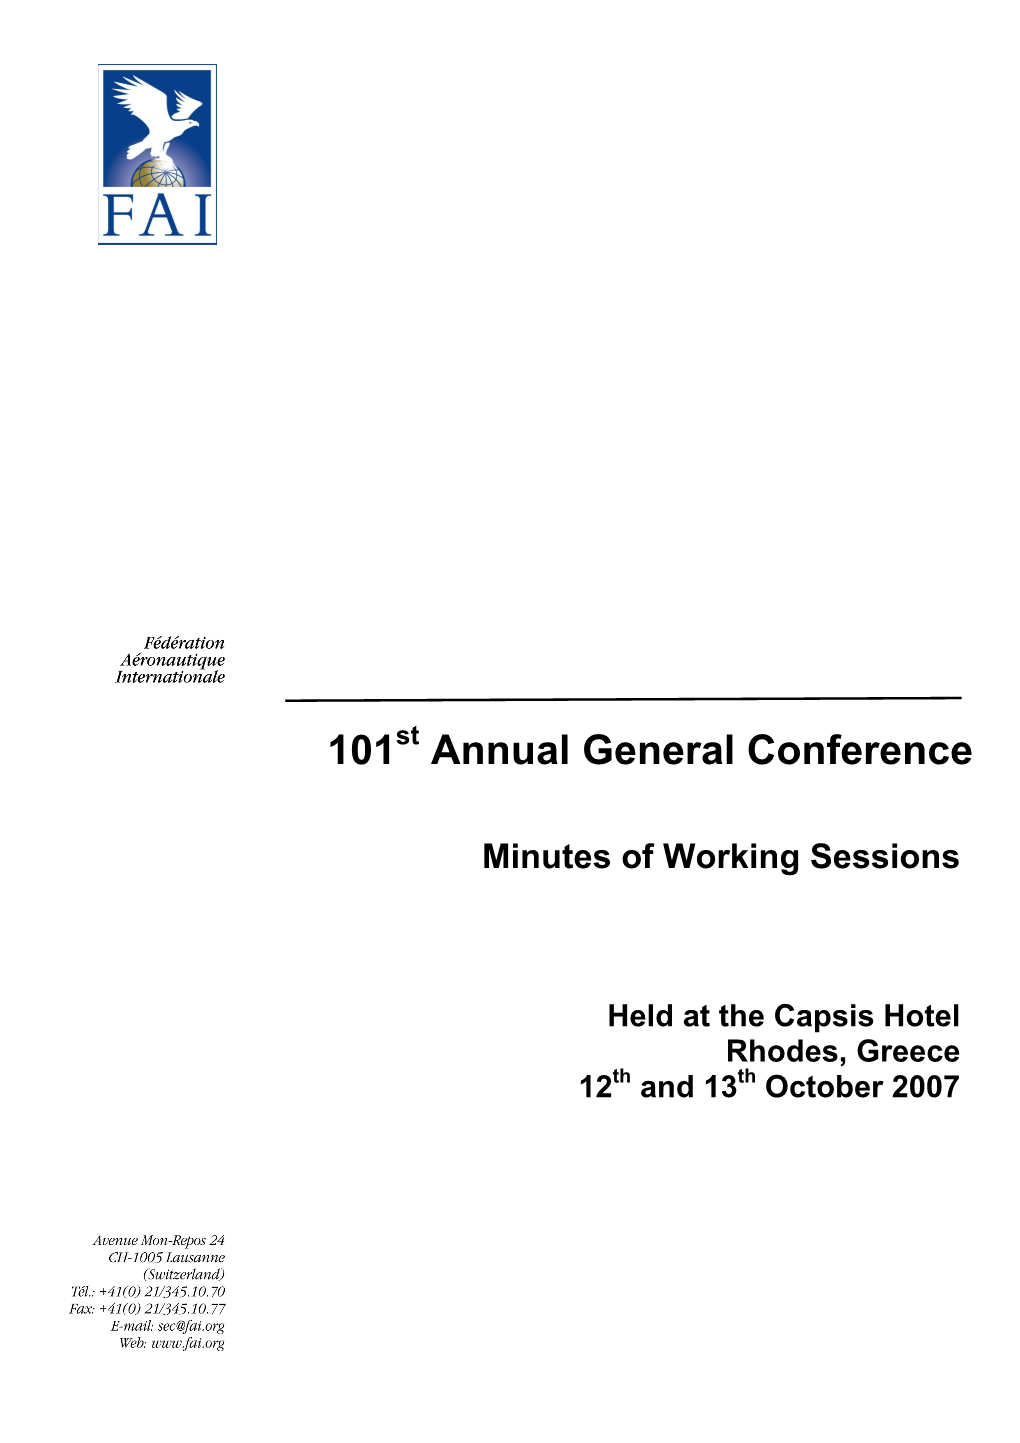 Minutes of the 101St FAI General Conference (Rhodes; 2007)